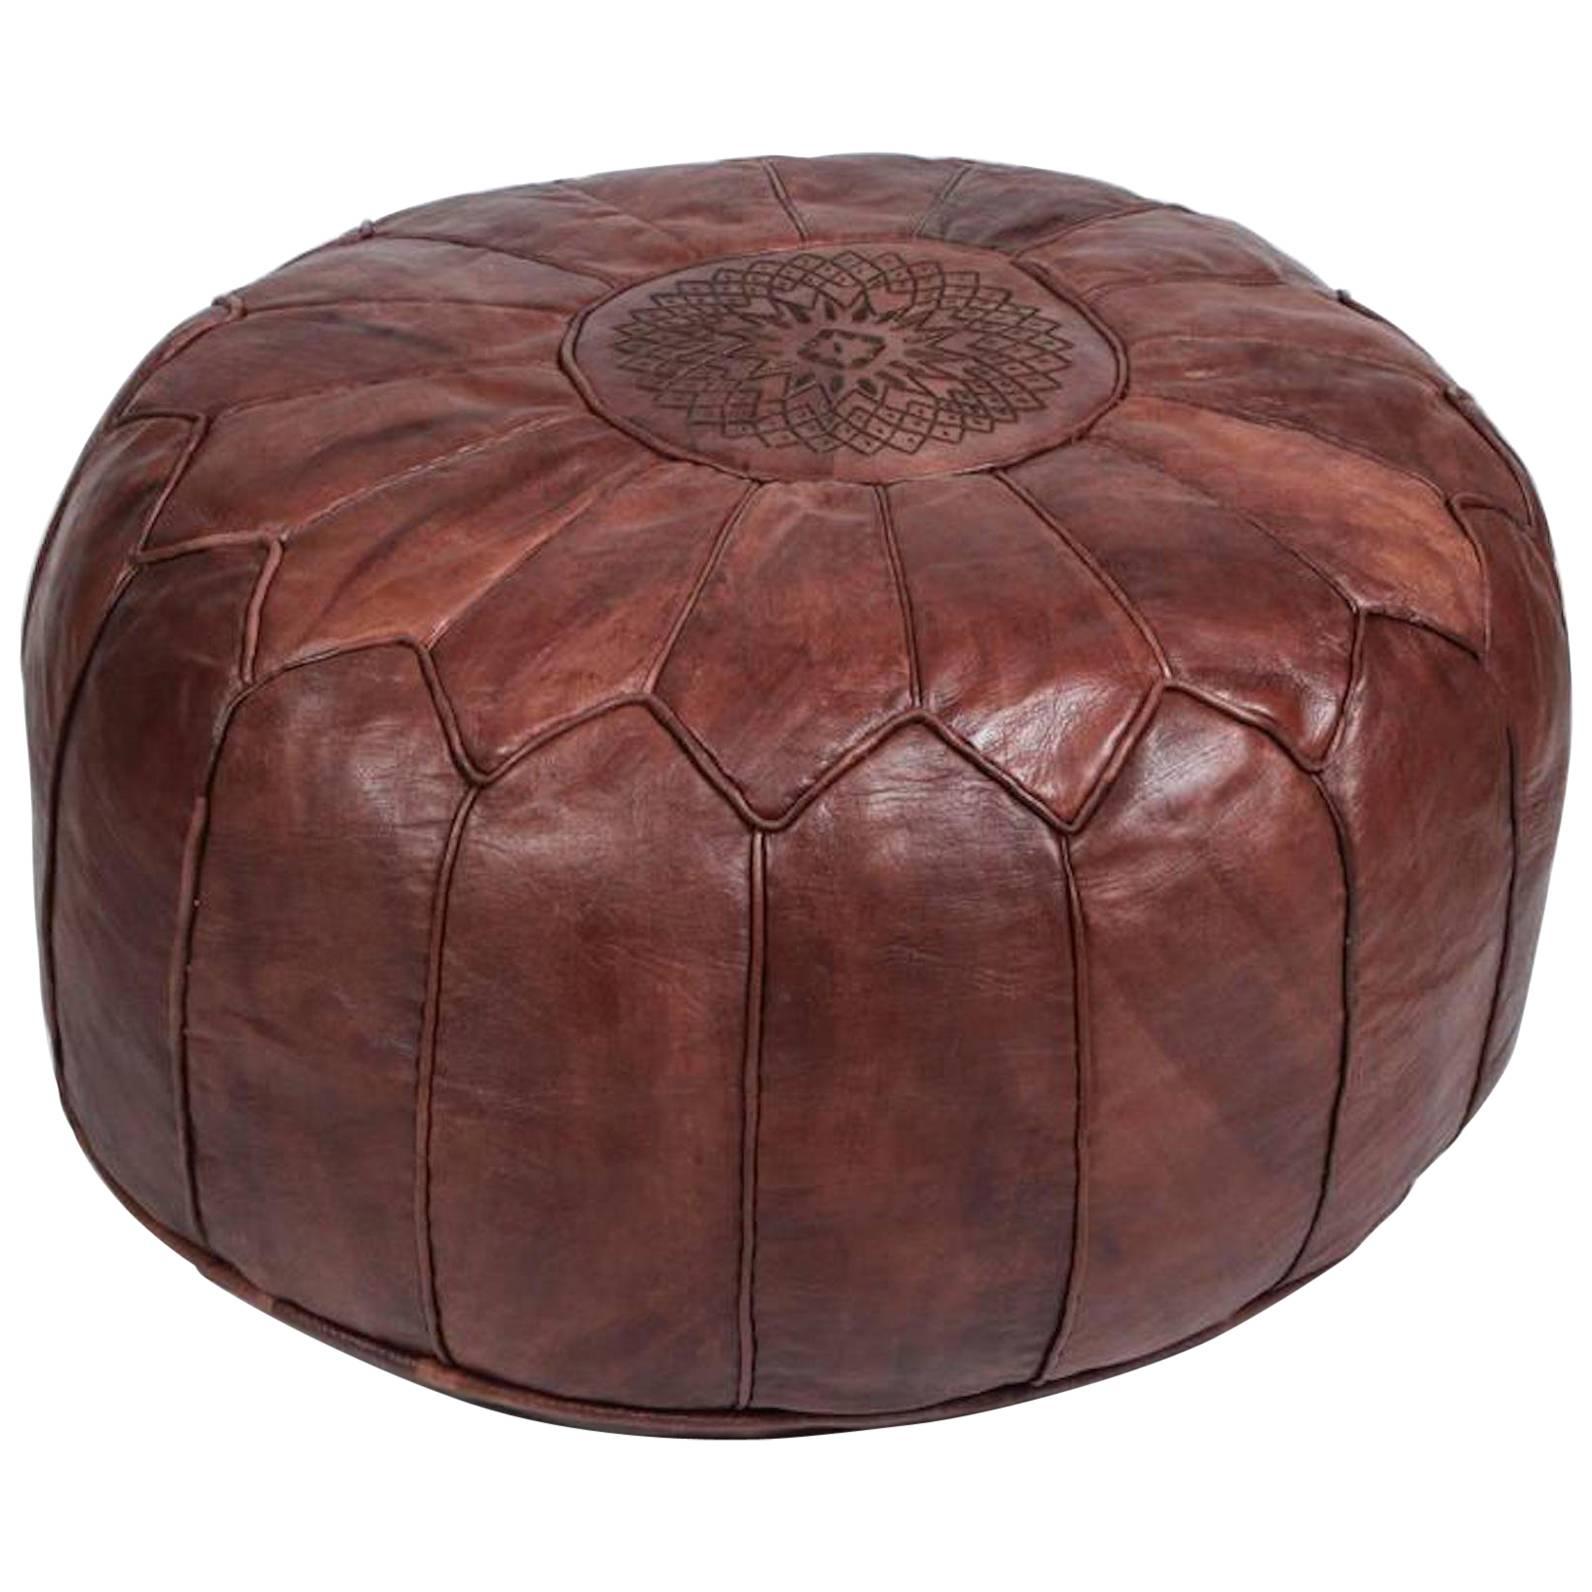 Vintage Moroccan Leather Pouf in Chocolate Brown Hand Tooled In Marrakech For Sale